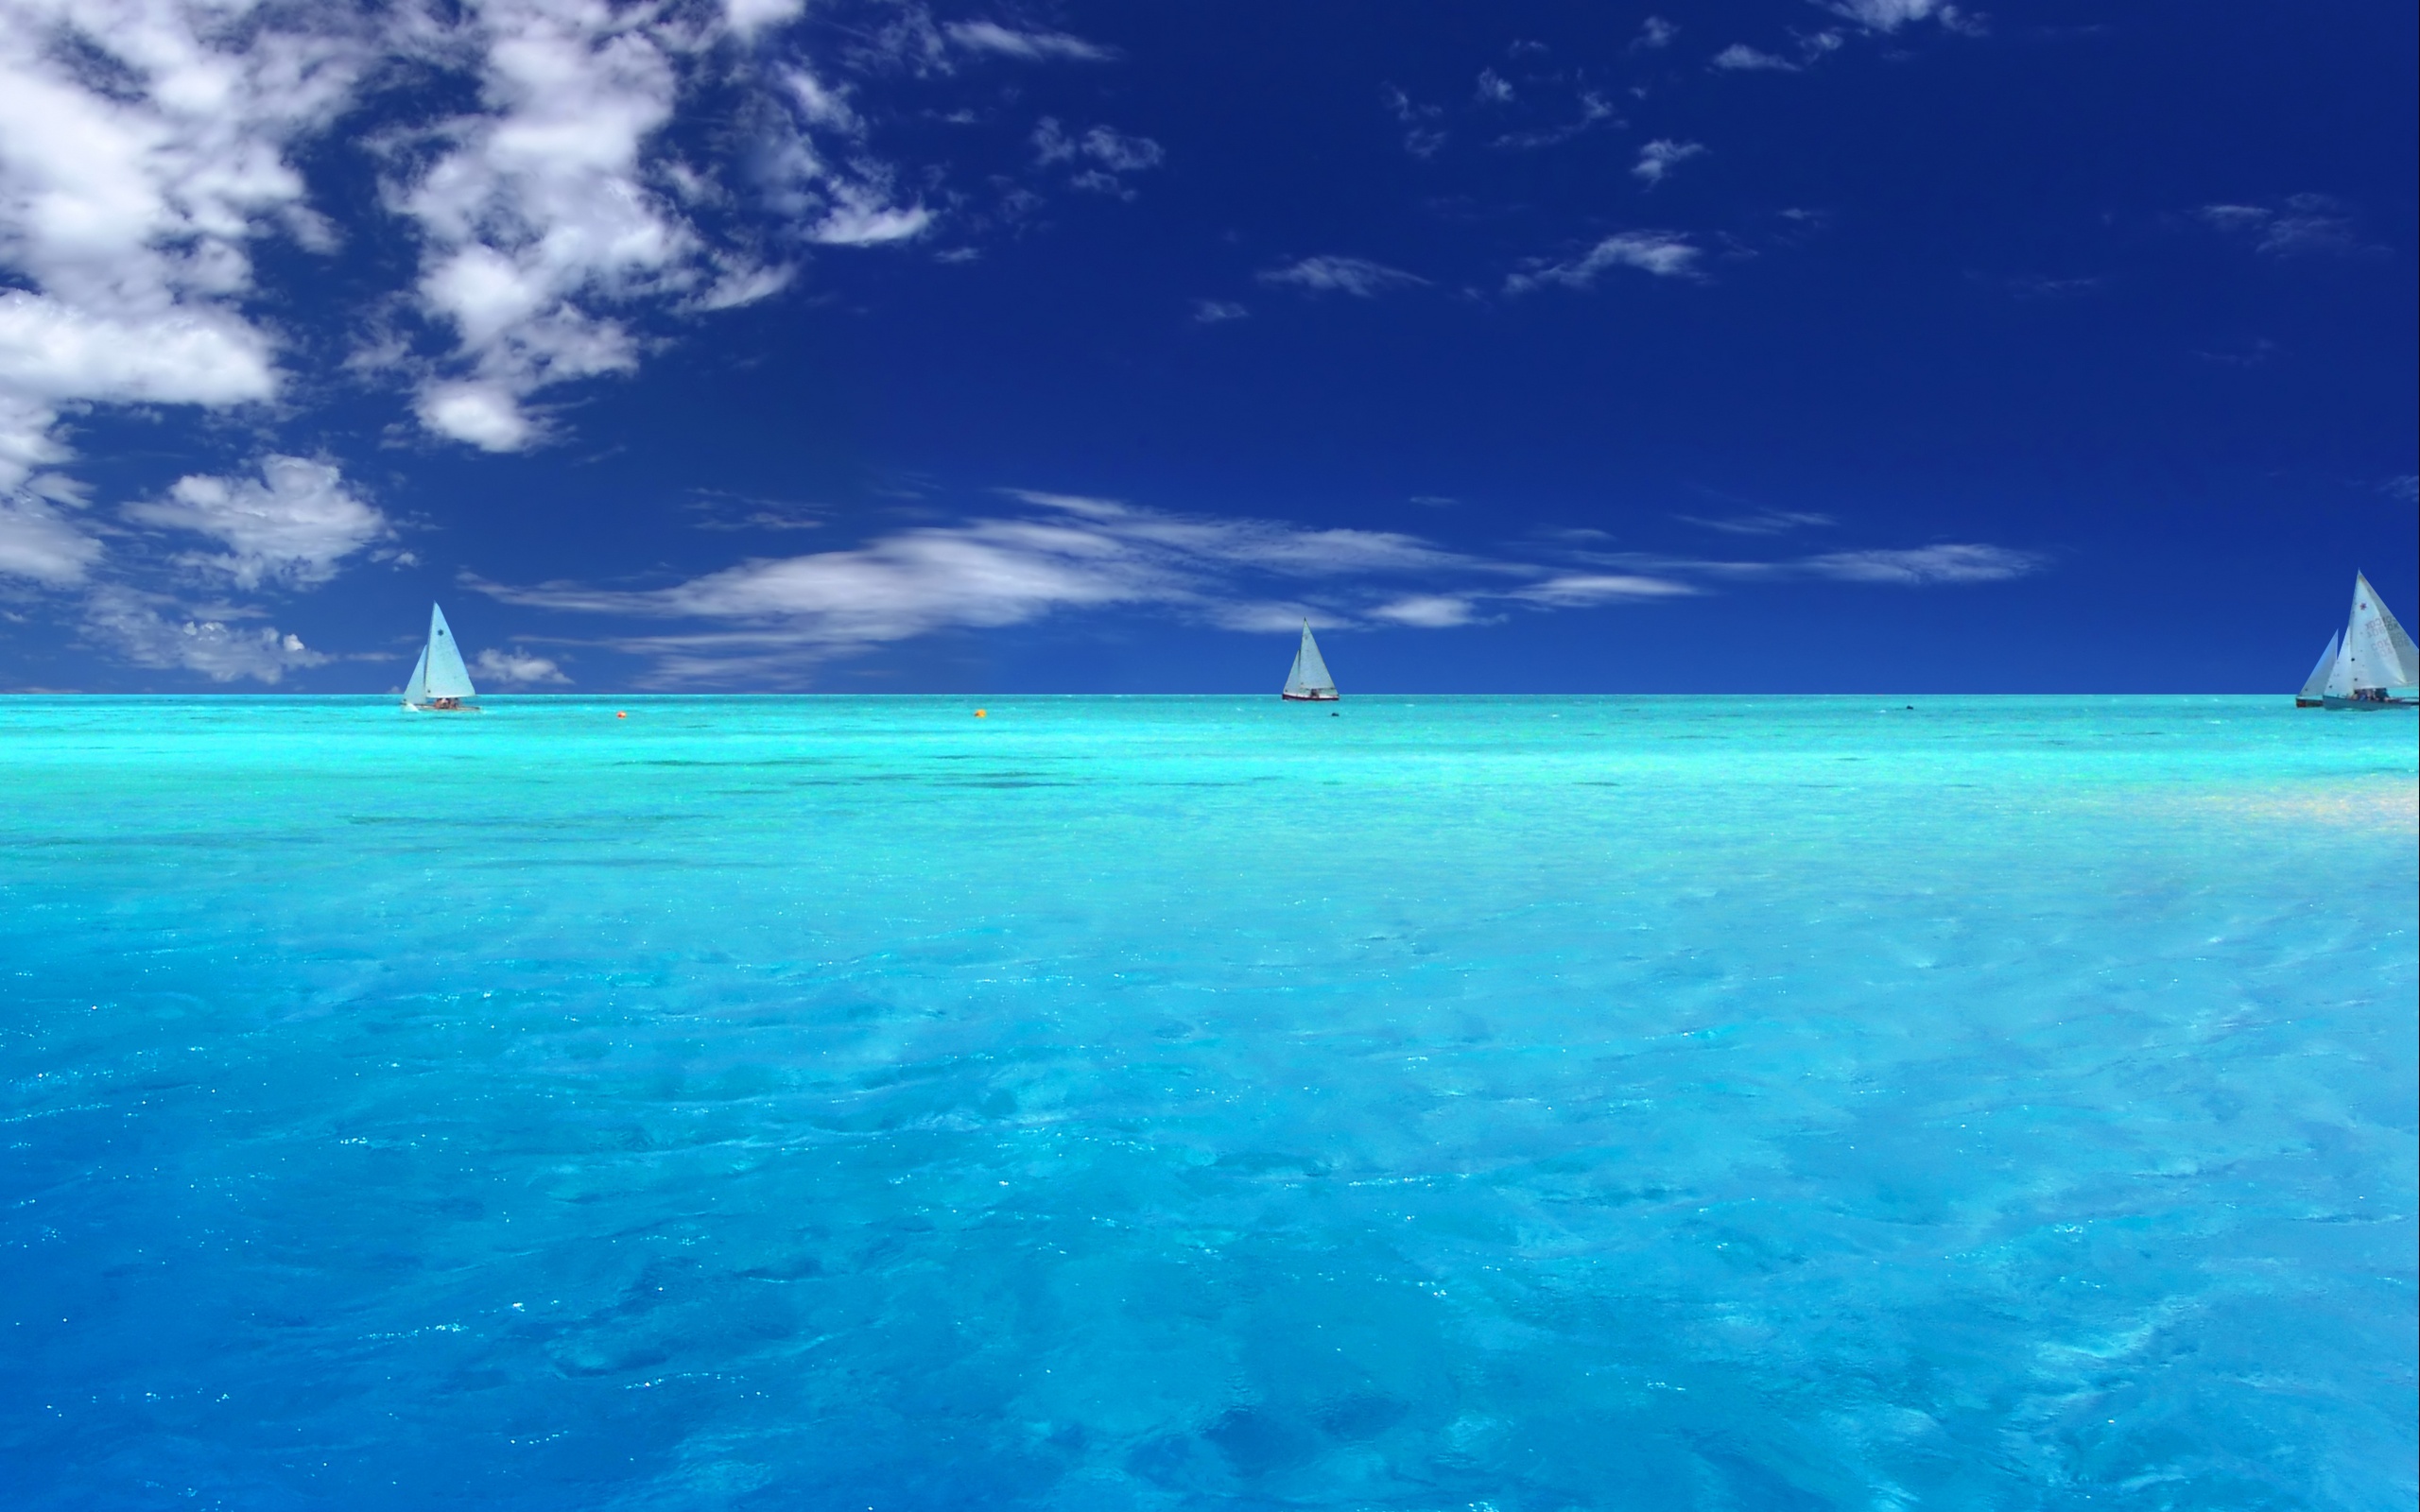 Sea Pictures - Wallpaper, High Definition, High Quality, Widescreen